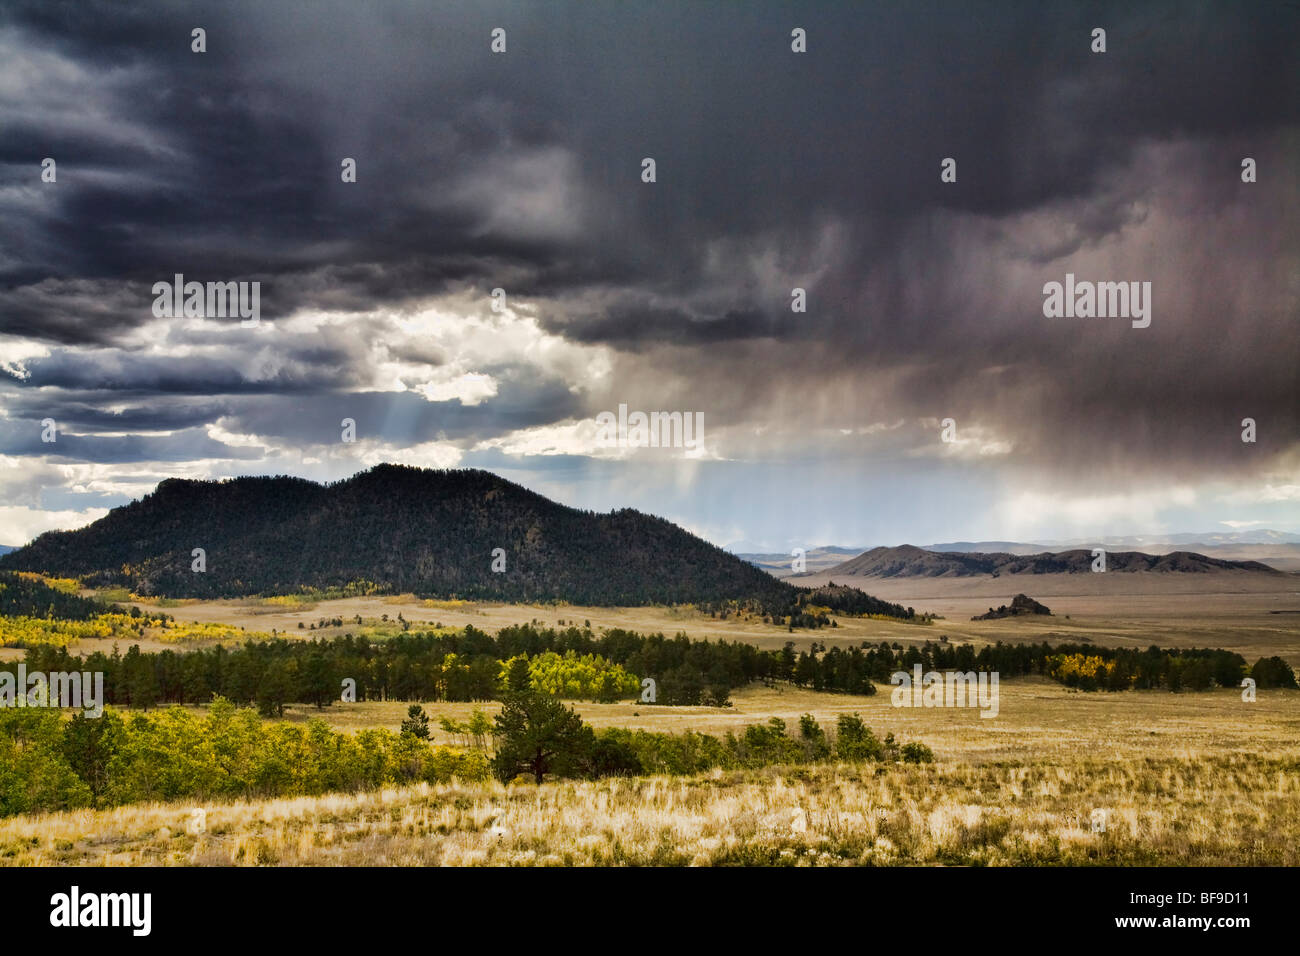 A thunderstorm over Spinney State Recreation area, Colorado. Stock Photo